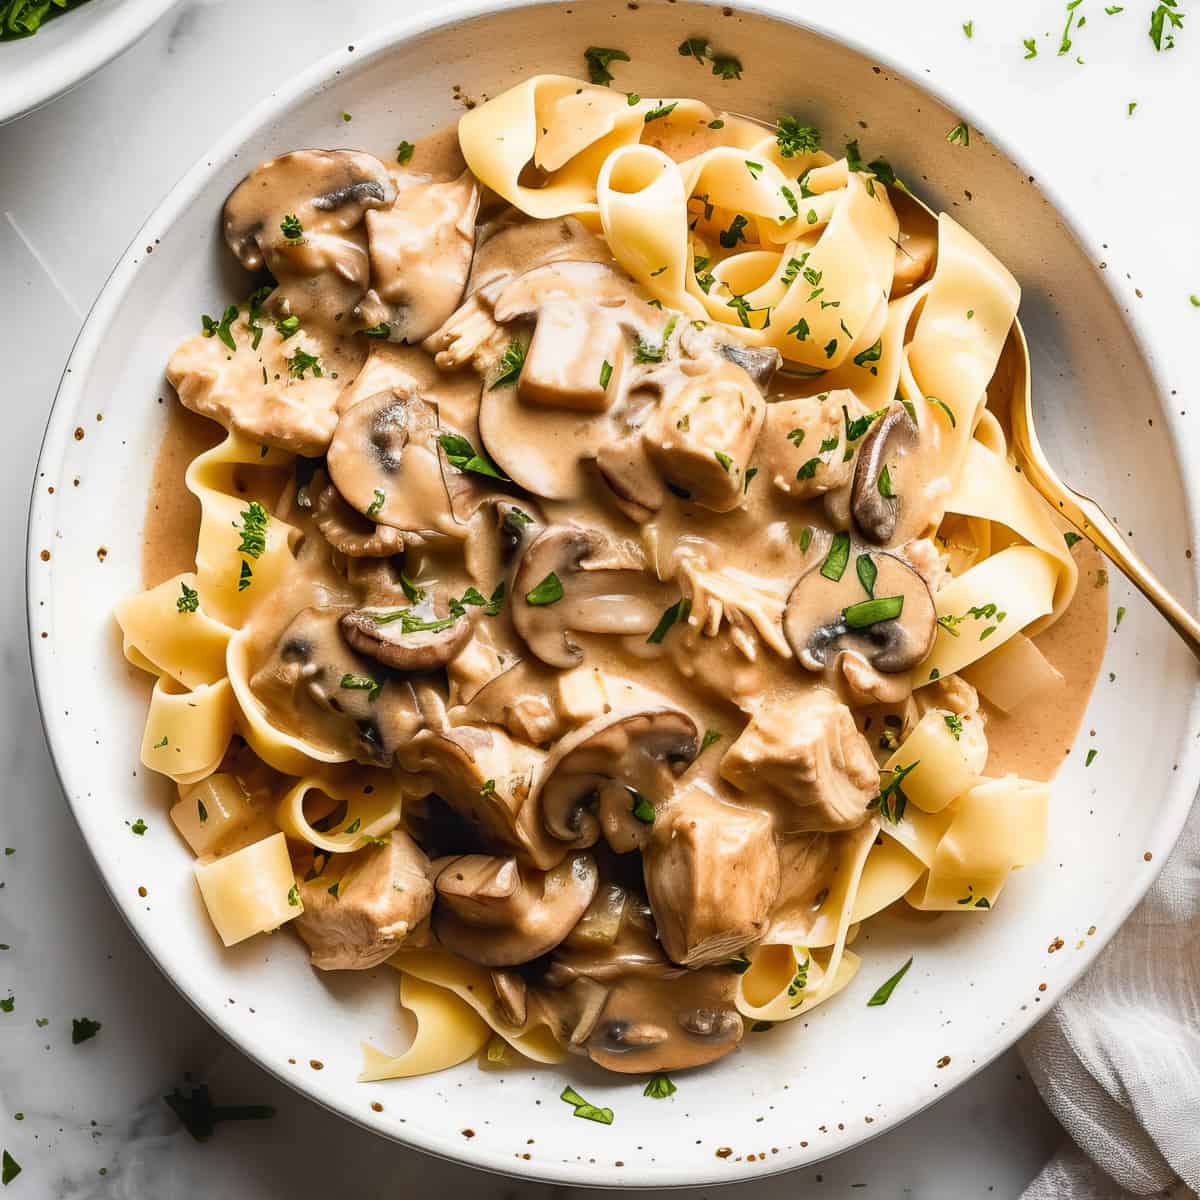 Chicken stroganoff with mushrooms and parsley over noodles in a white bowl.